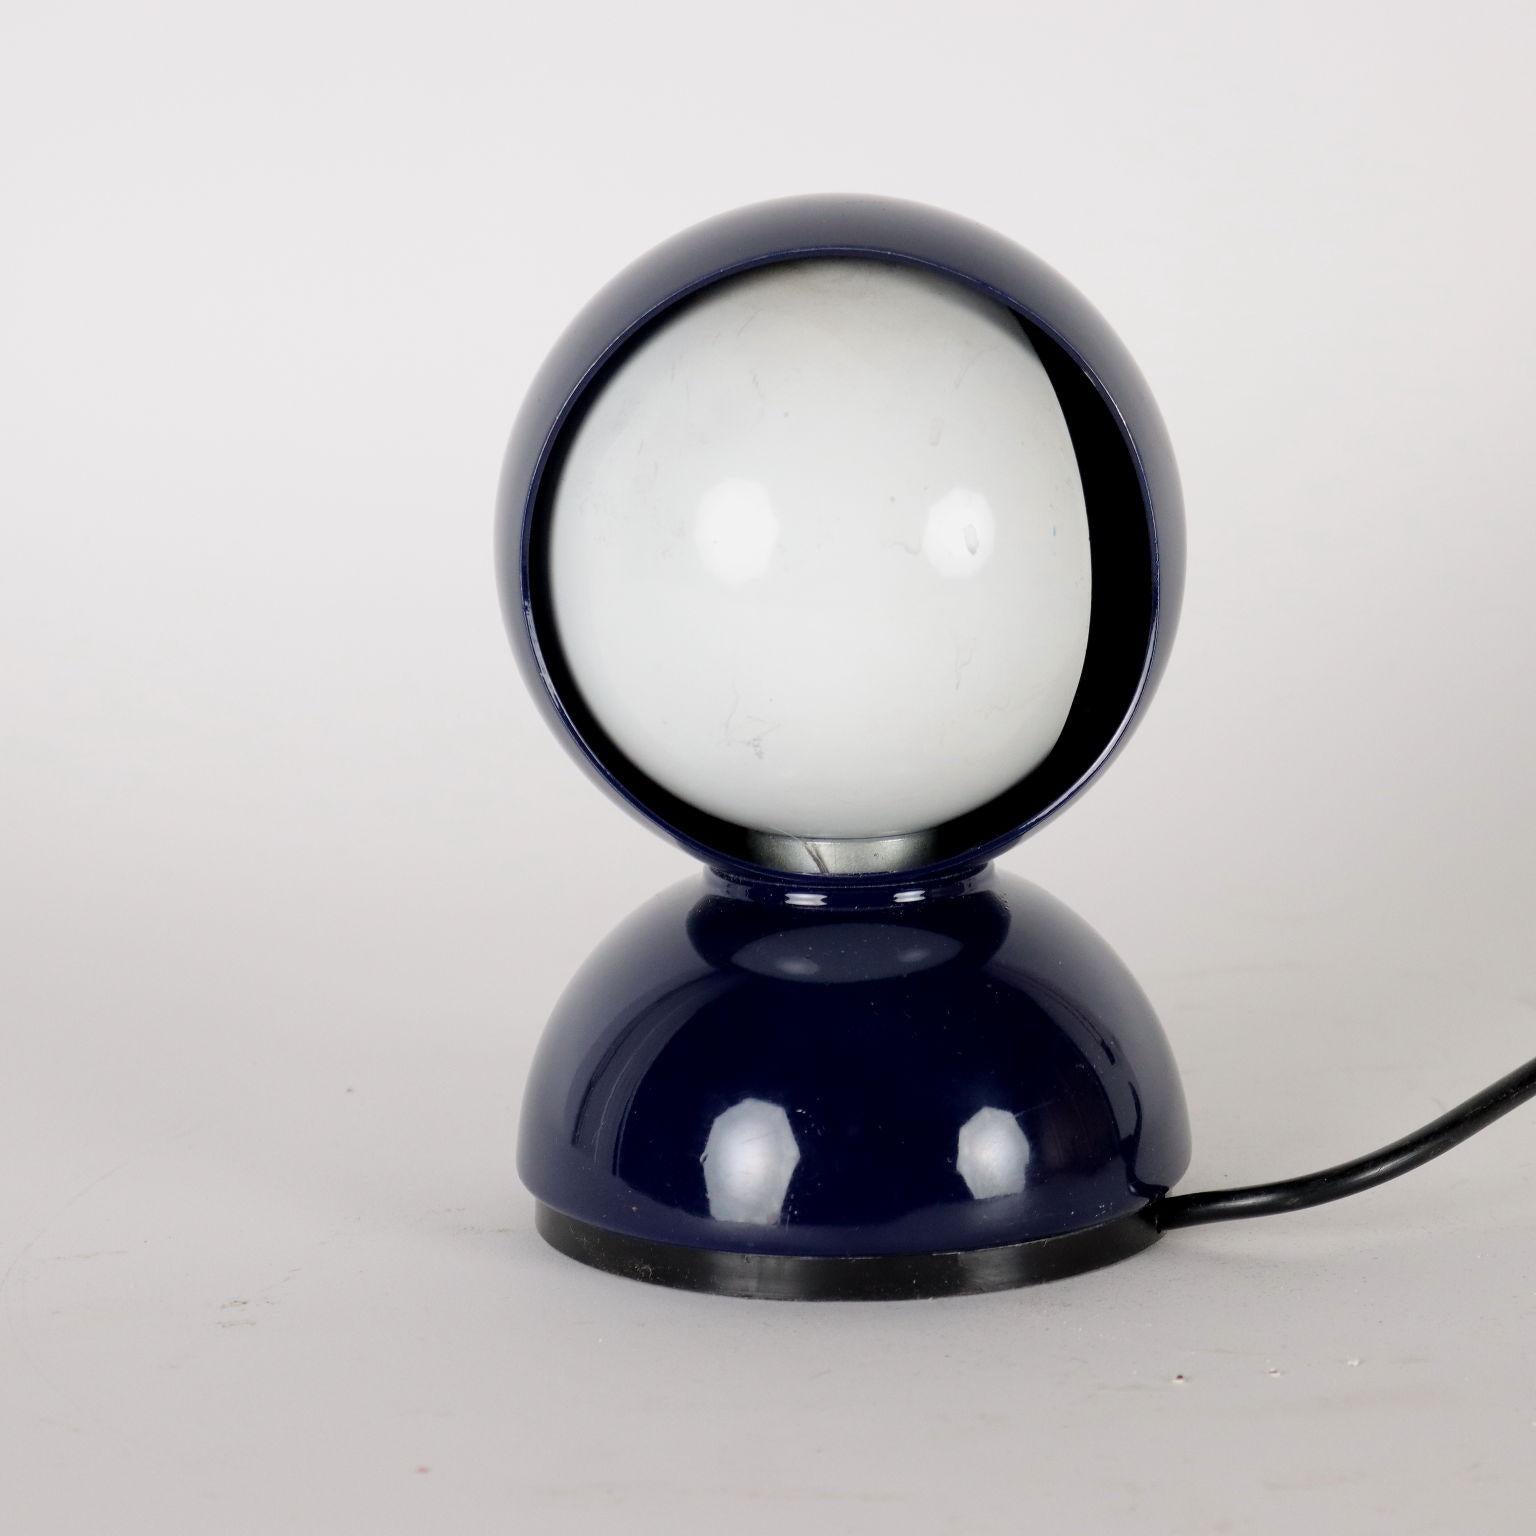 Enameled Eclisse Lamp by Vico Magistretti for Artemide, 1960s-70s